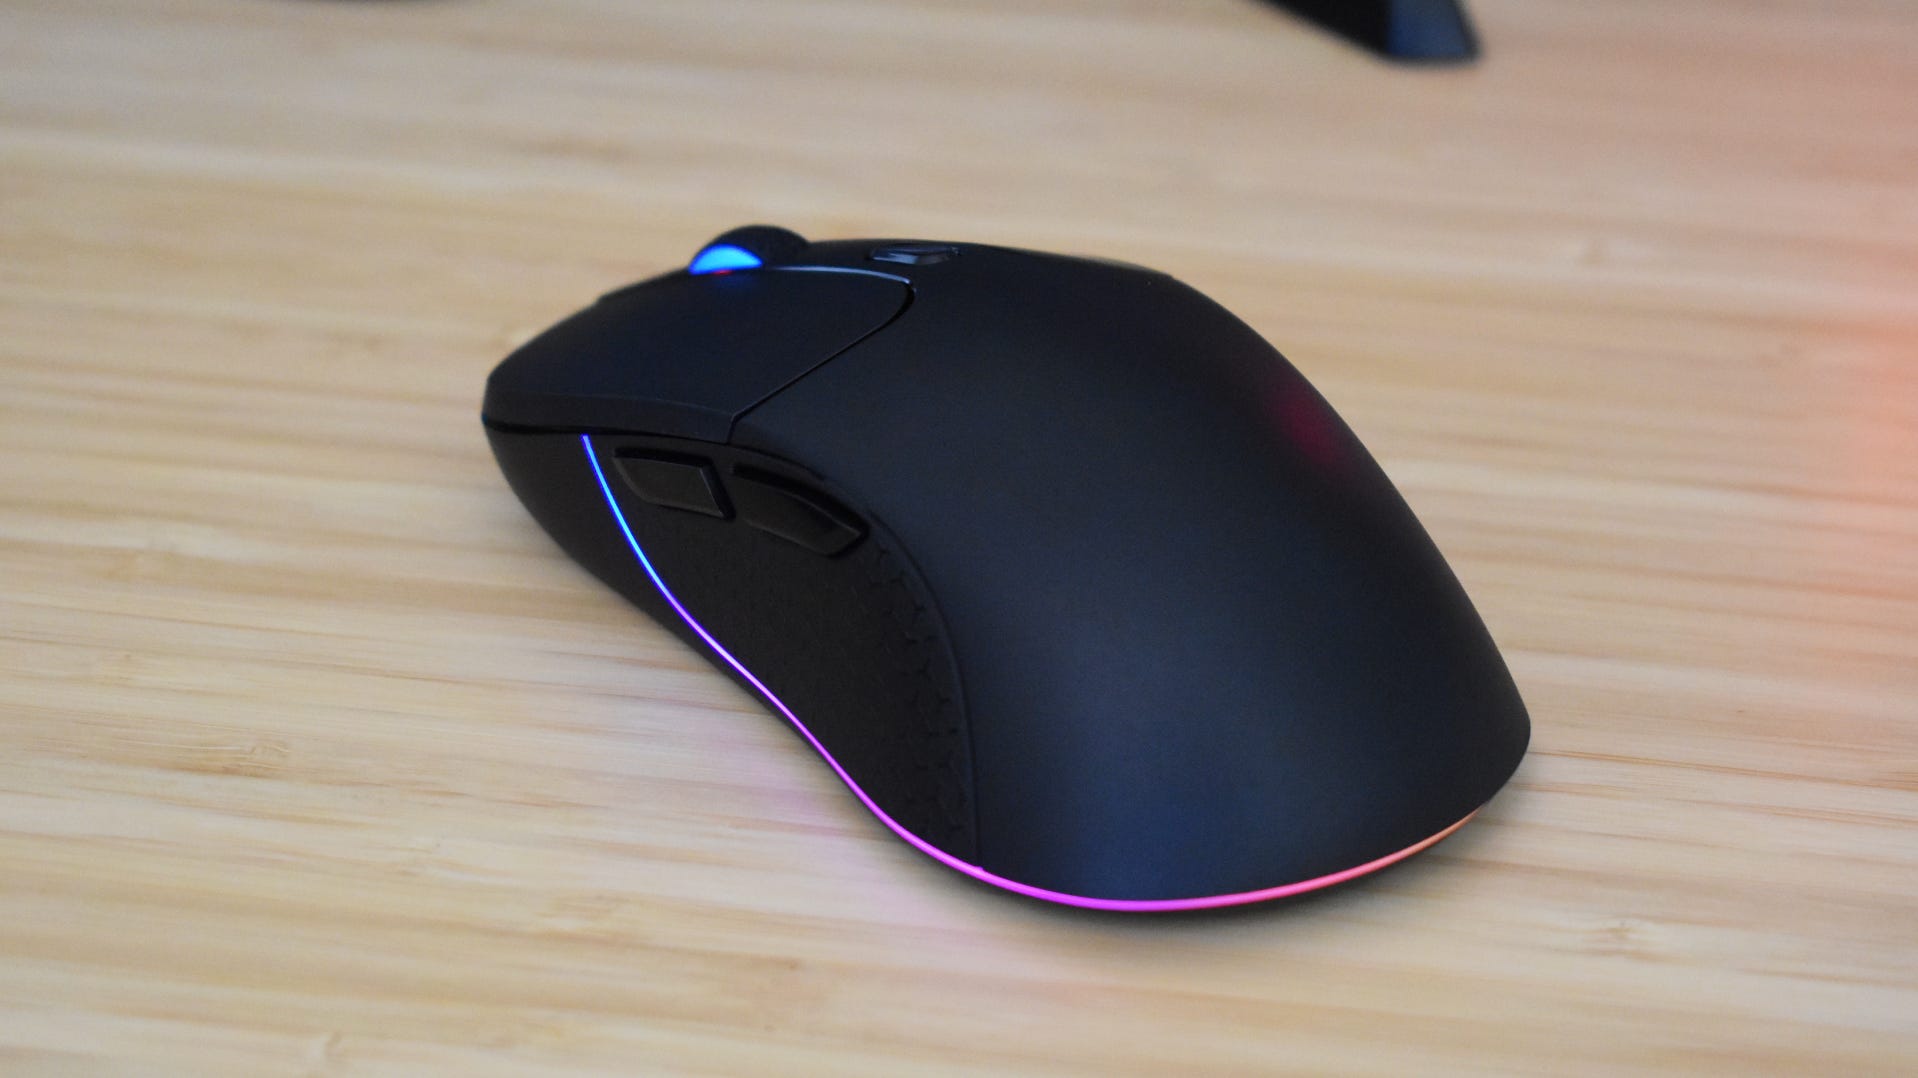 Keychron M3 Gaming Mouse resting on desk